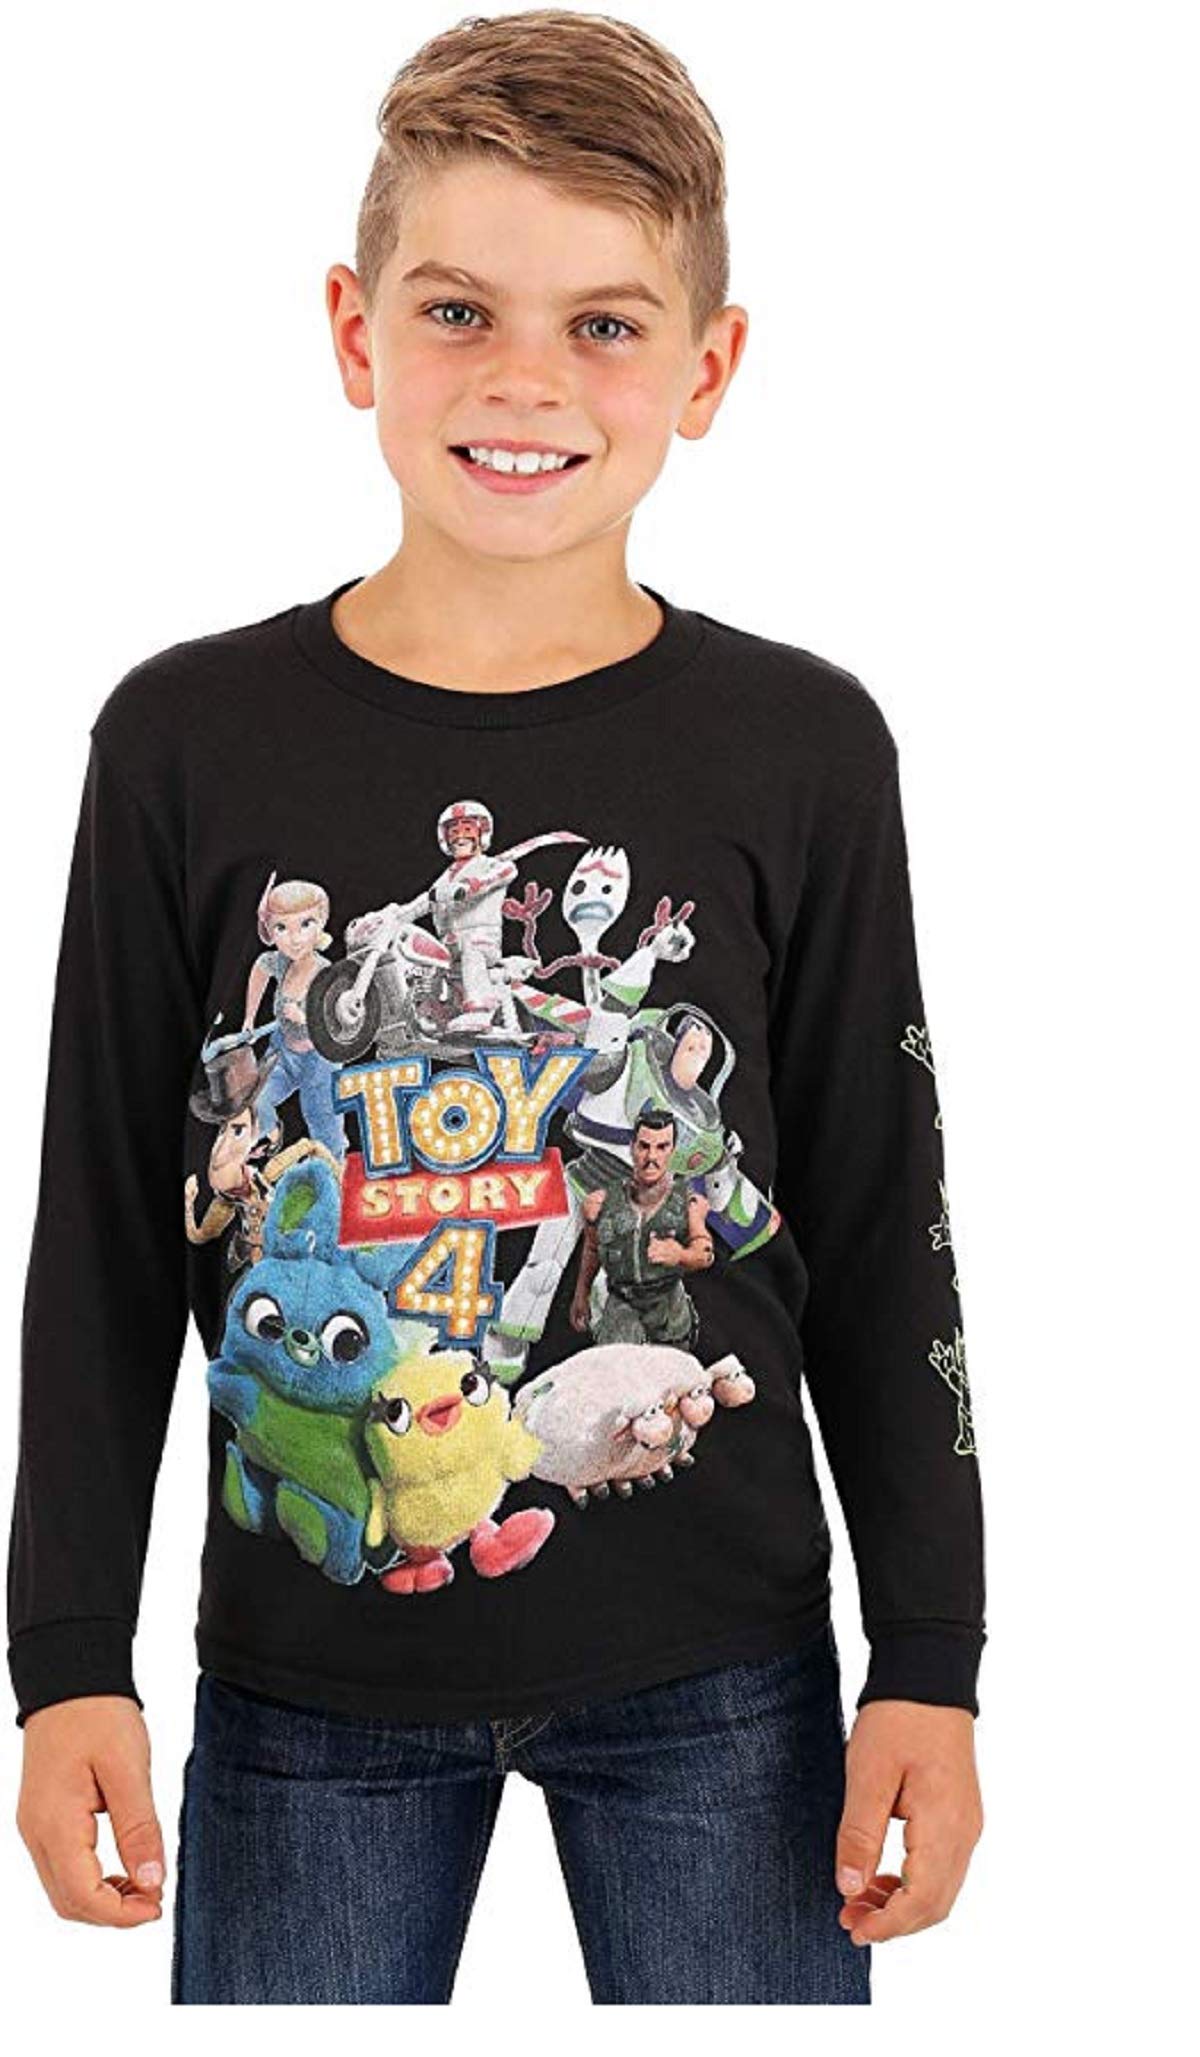 Long Sleeve Shirt Toy Story 4 Character Group Boys X-Large Black